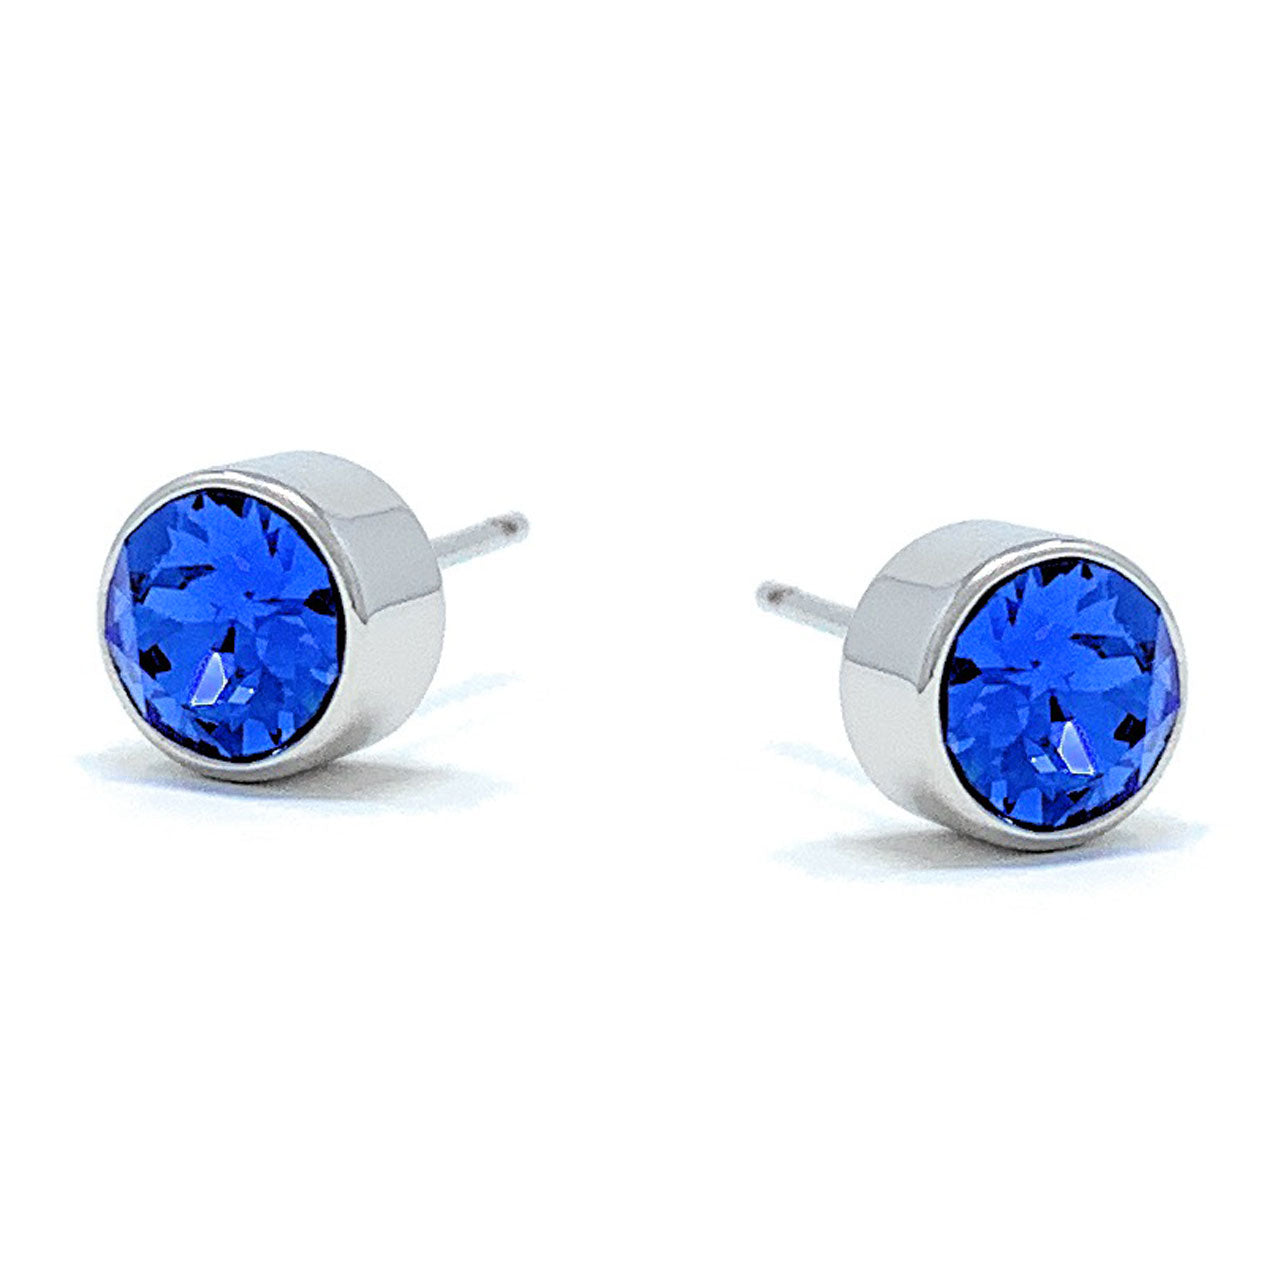 Harley Small Stud Earrings with Blue Sapphire Round Crystals from Swarovski Silver Toned Rhodium Plated - Ed Heart